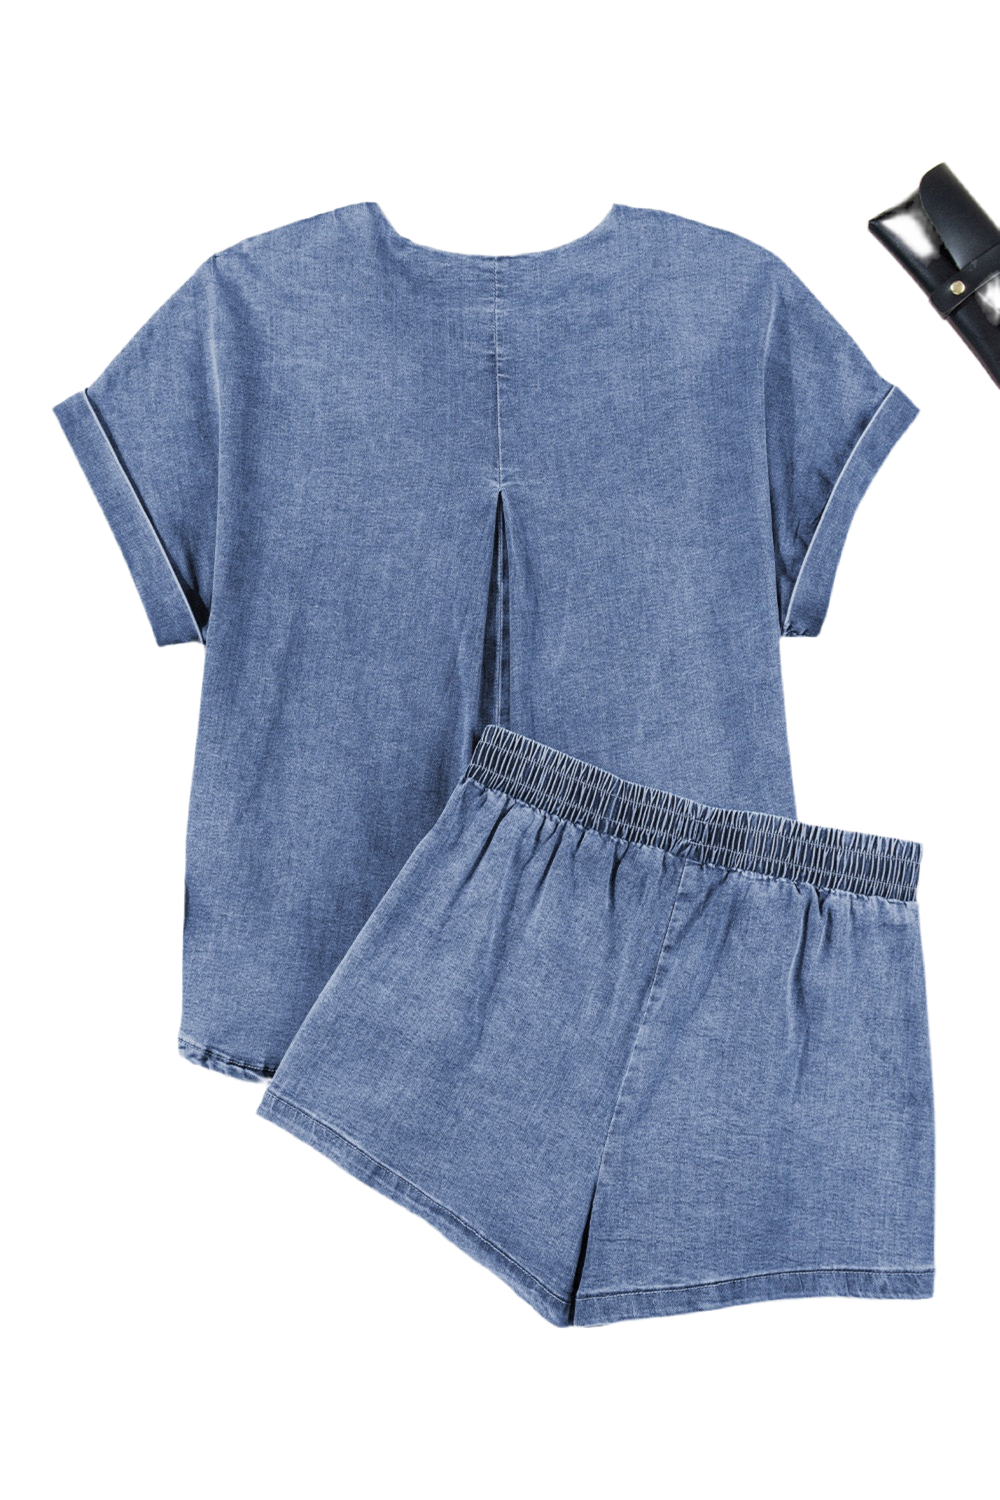 Peace and Love Top and Shorts Denim Set